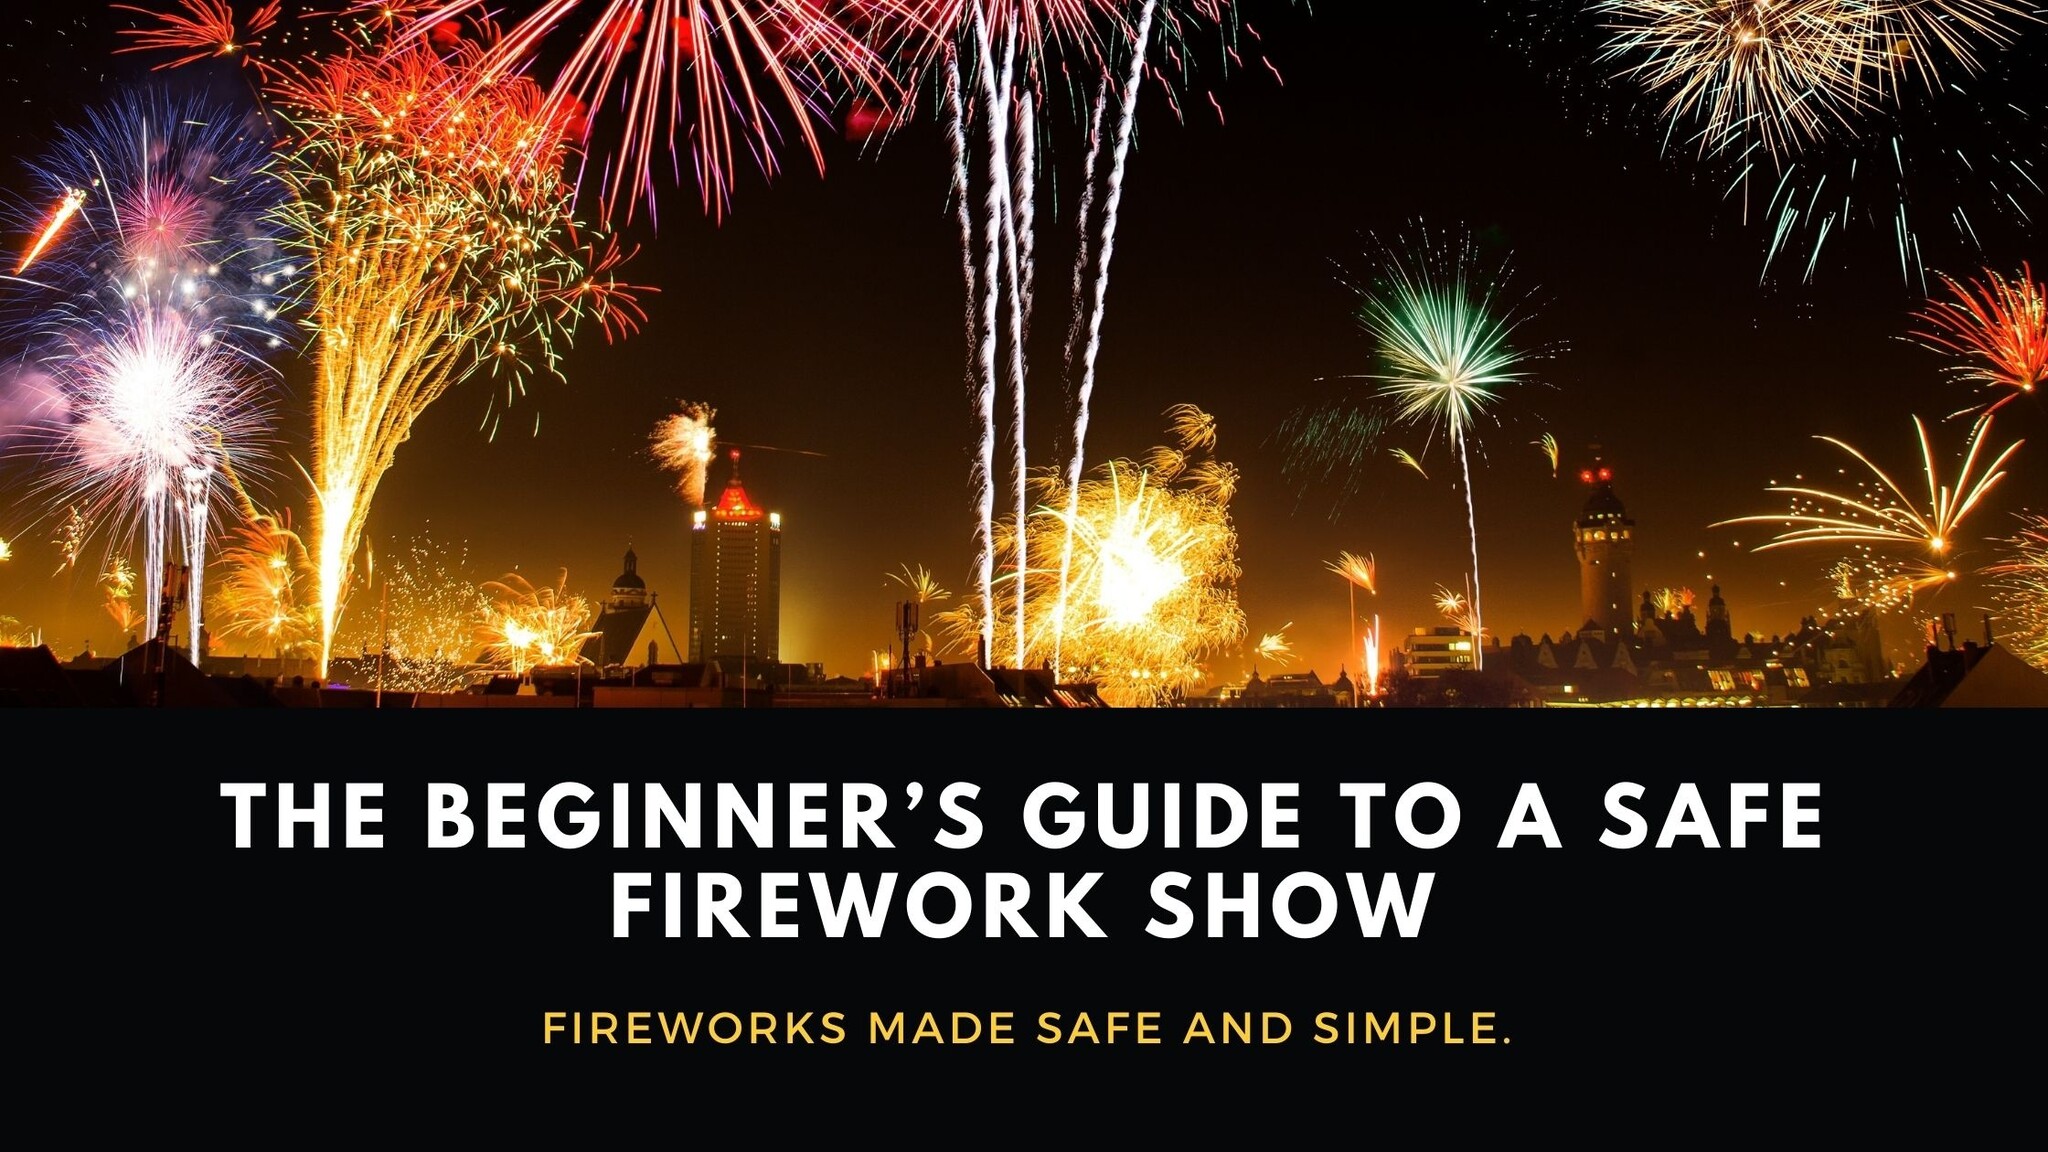 The Beginner’s Guide to a Safe Firework Show